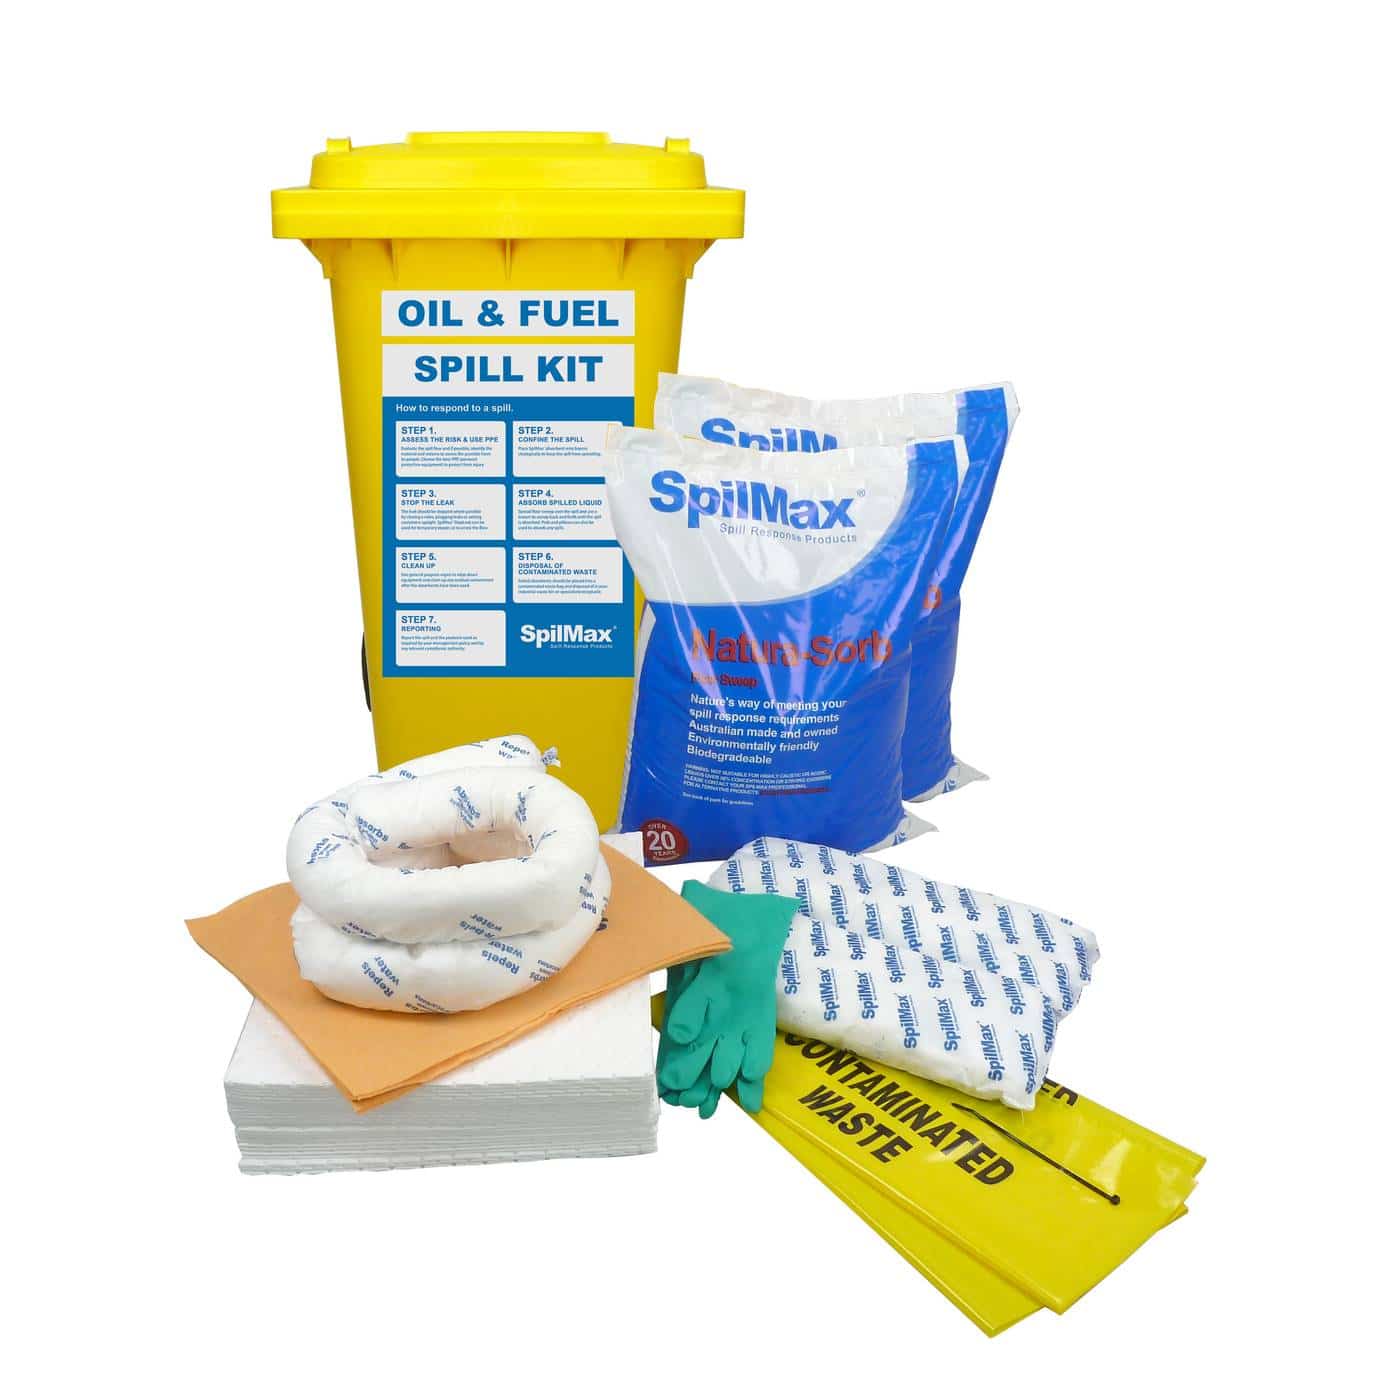 SpilMax 140L Oil & Fuel Workplace Spill Kit with contents showing